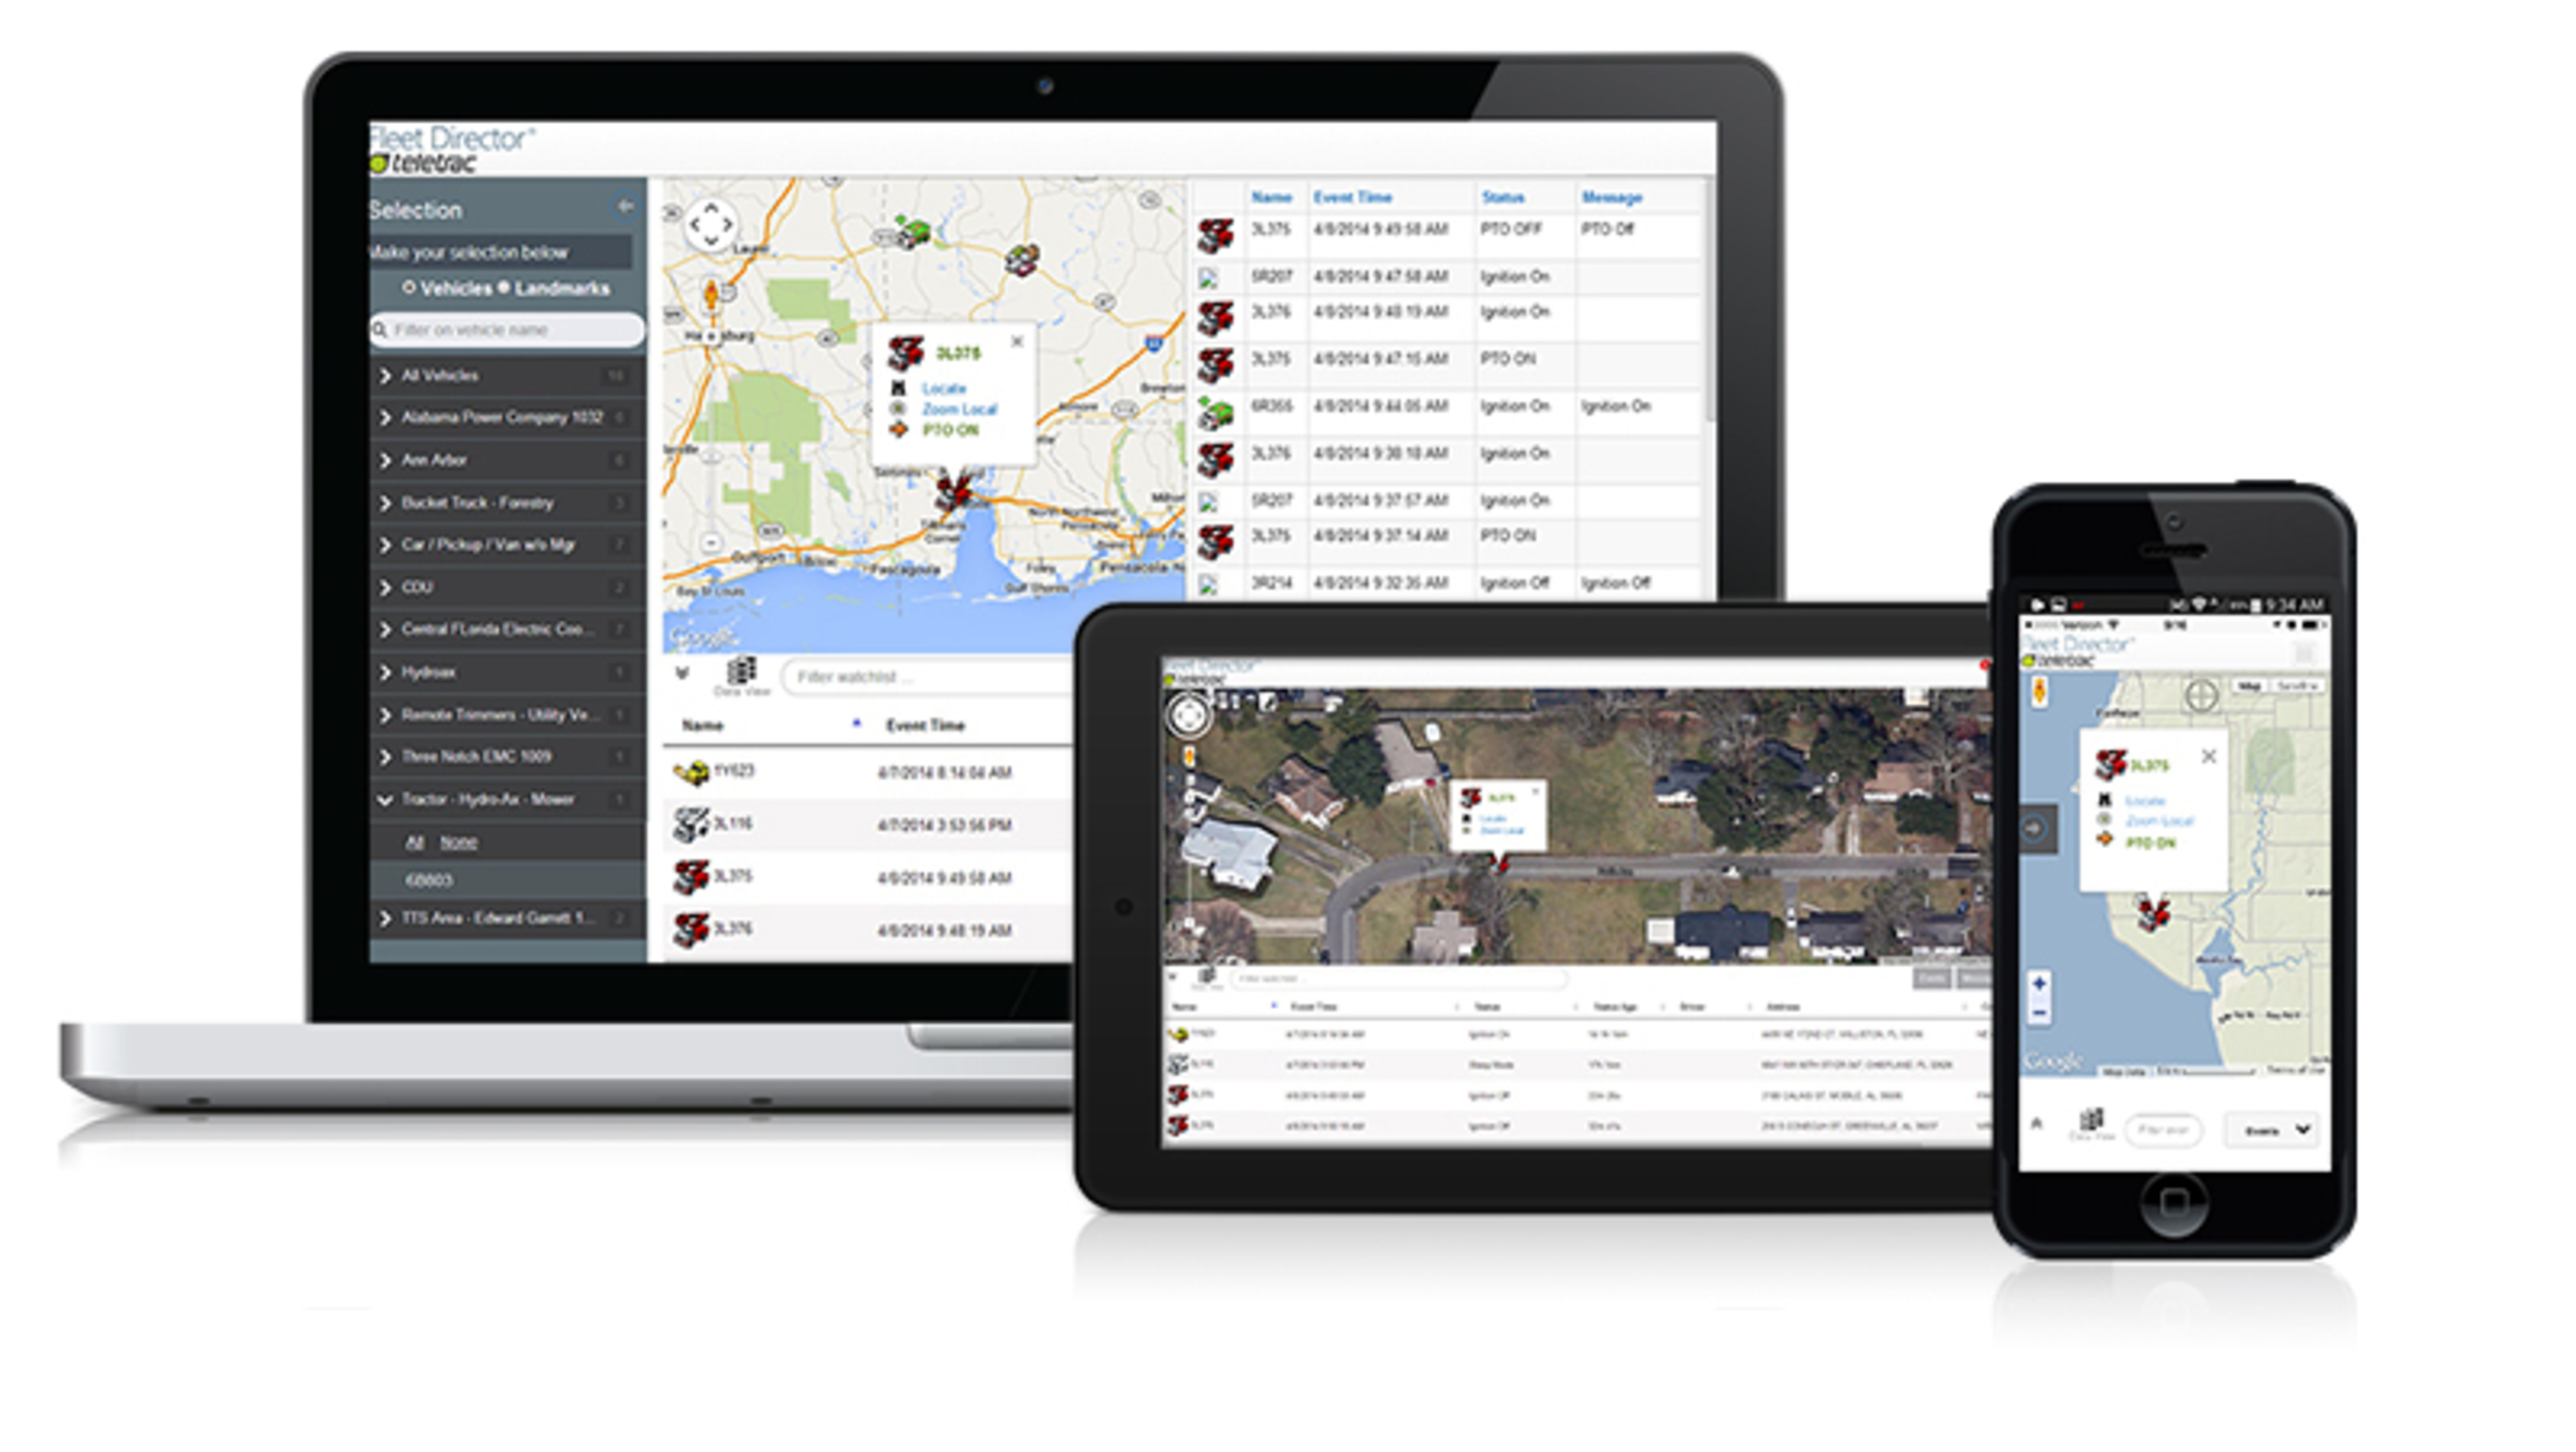 Teletrac GPS Viewer allows companies to monitor real-time vehicle activity directly from any mobile device and browser, 24/7. (PRNewsFoto/Teletrac Inc. )